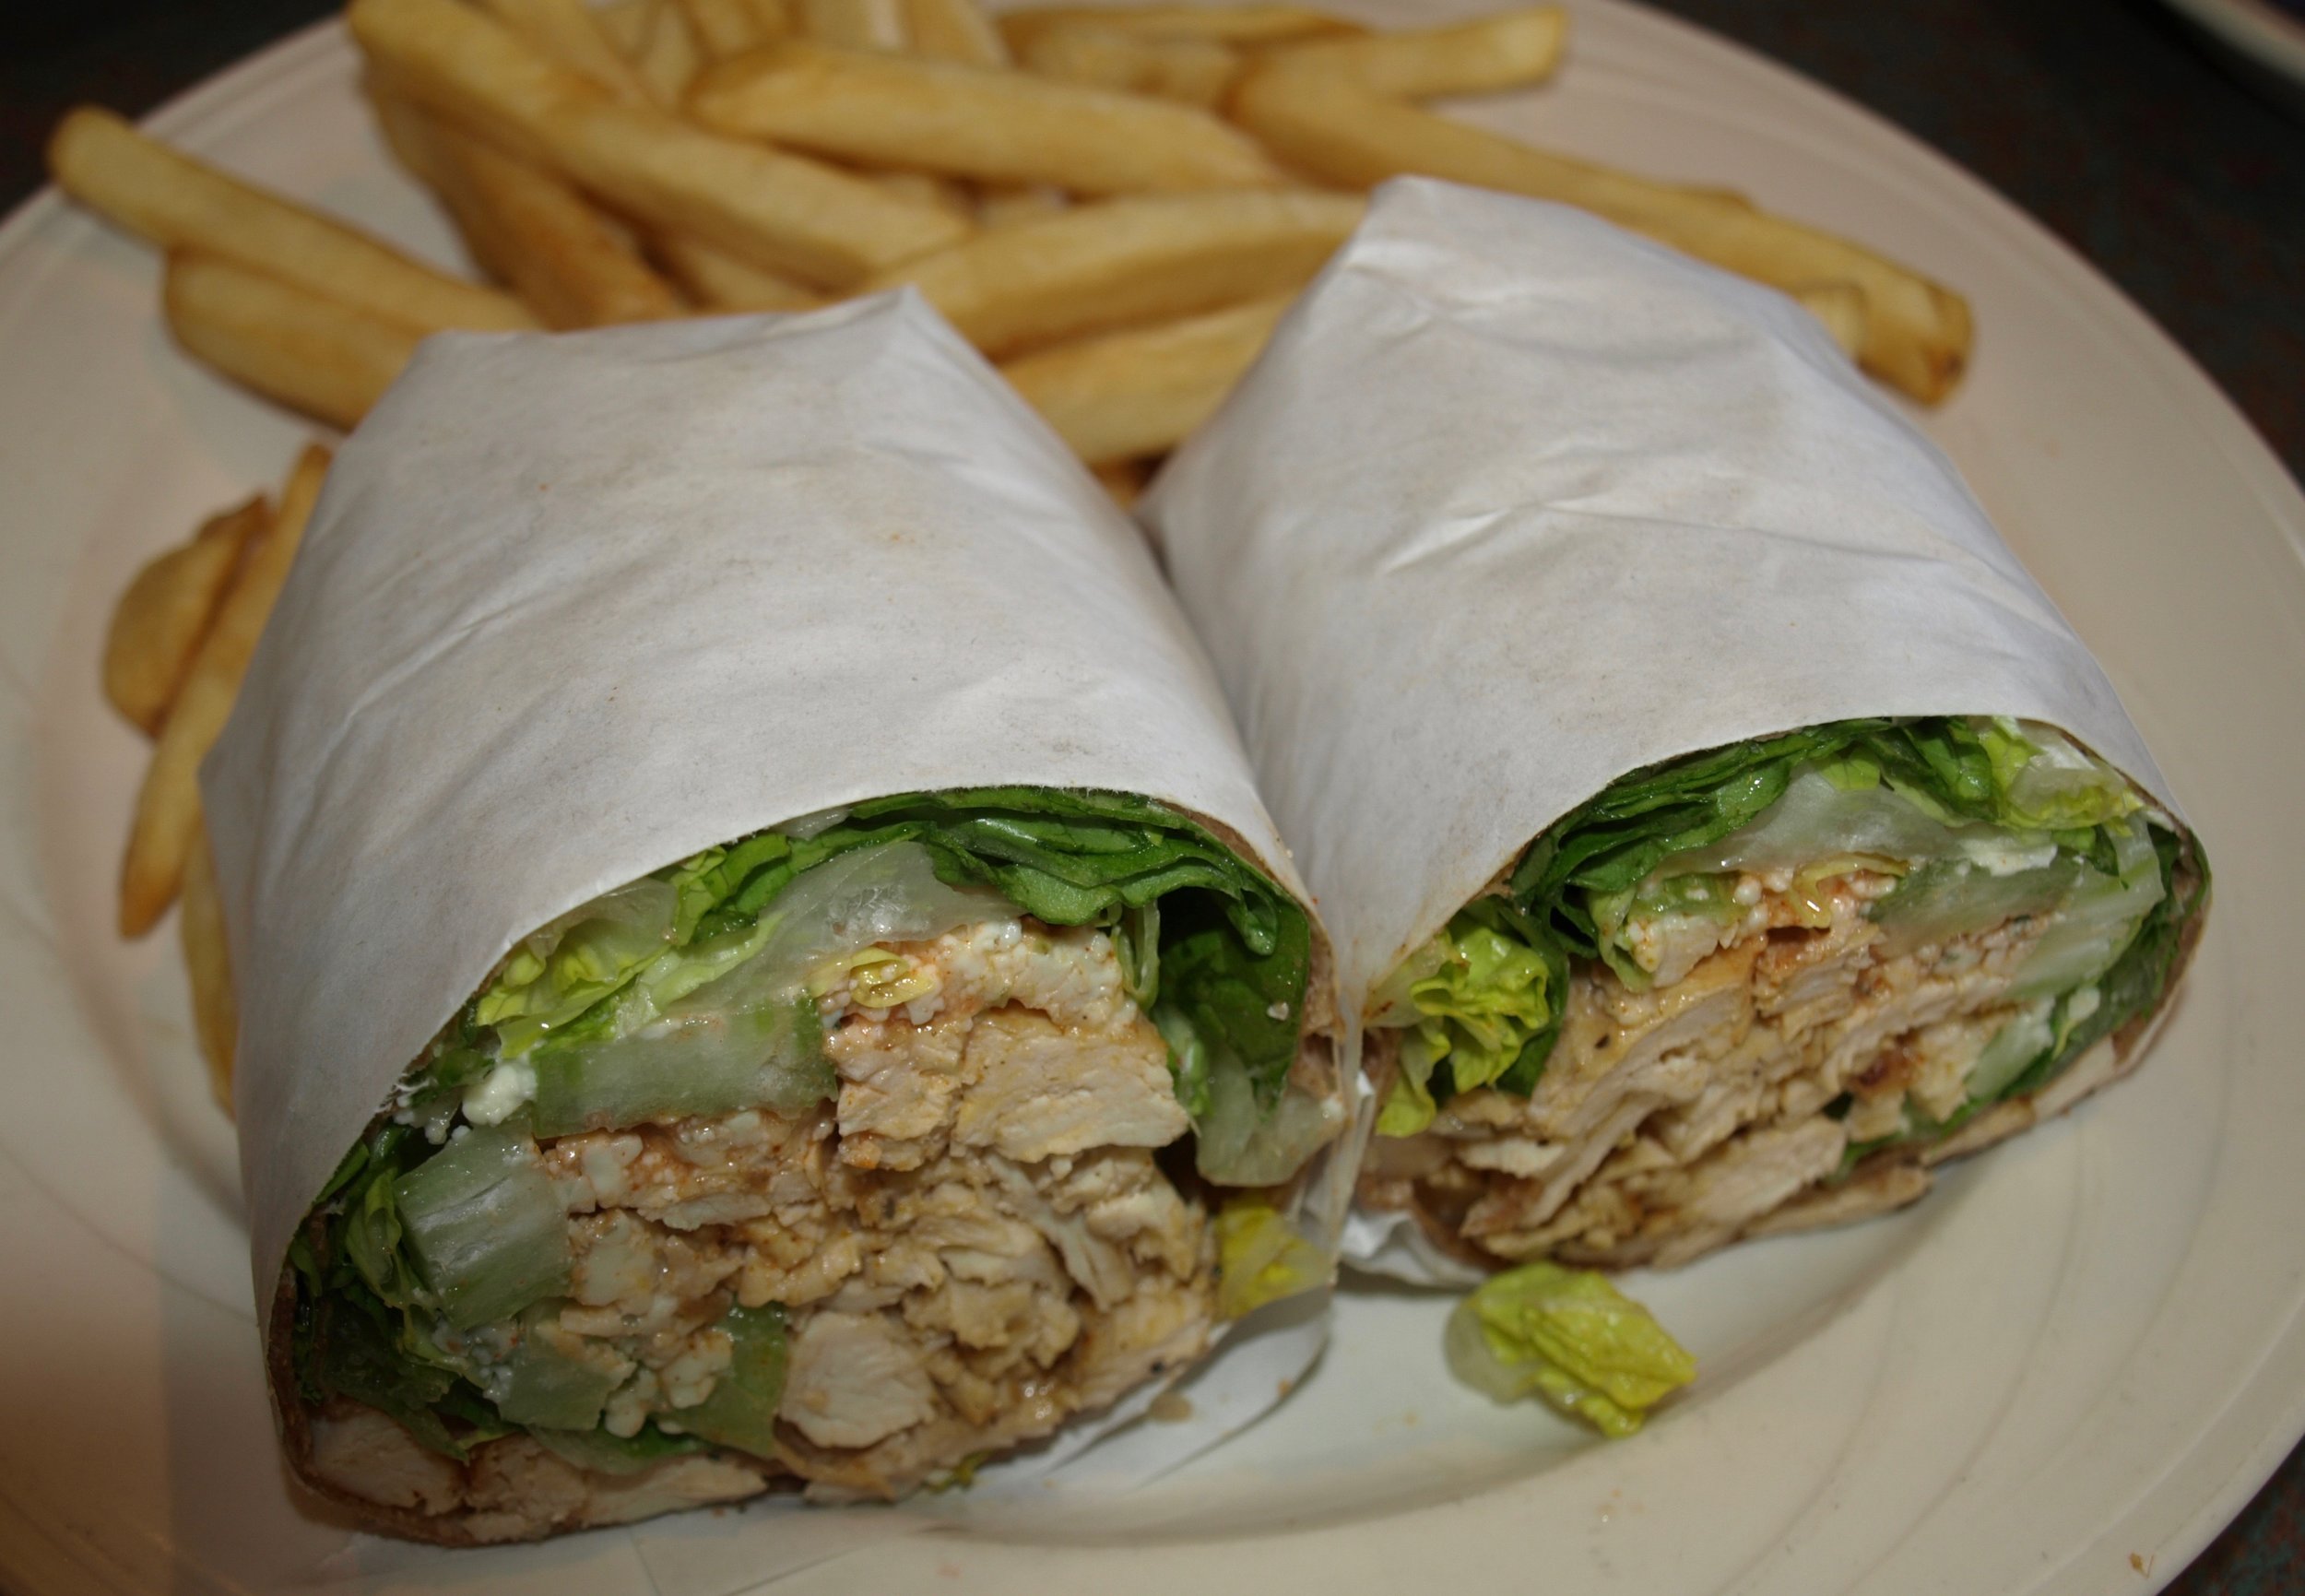  Buffalo Chicken Wrap marries spicy chicken and bleu cheese dressing. 